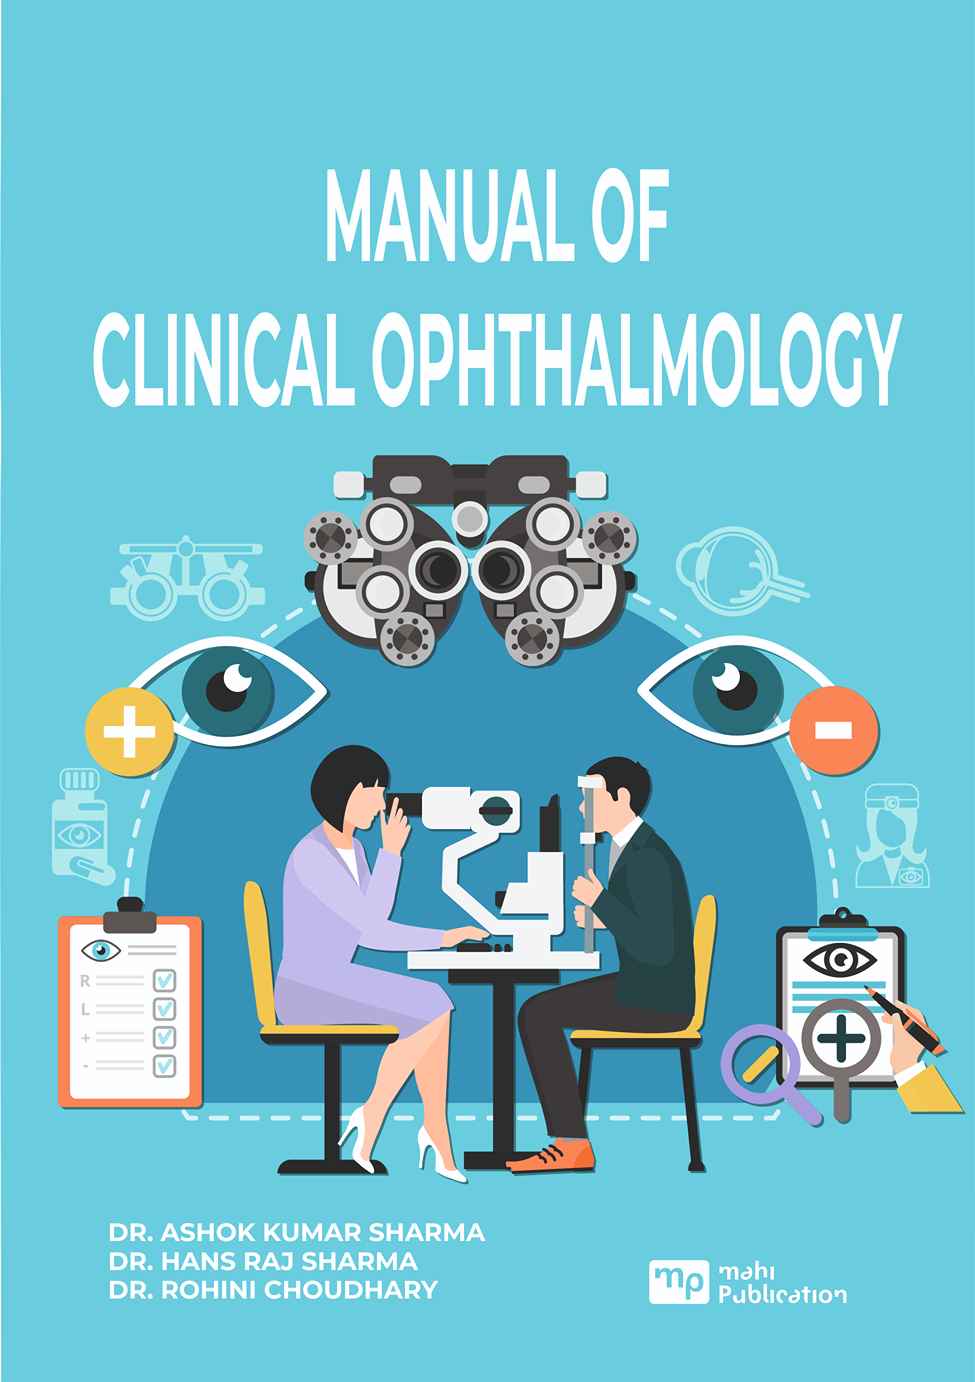 Manual of clinical ophthalmology